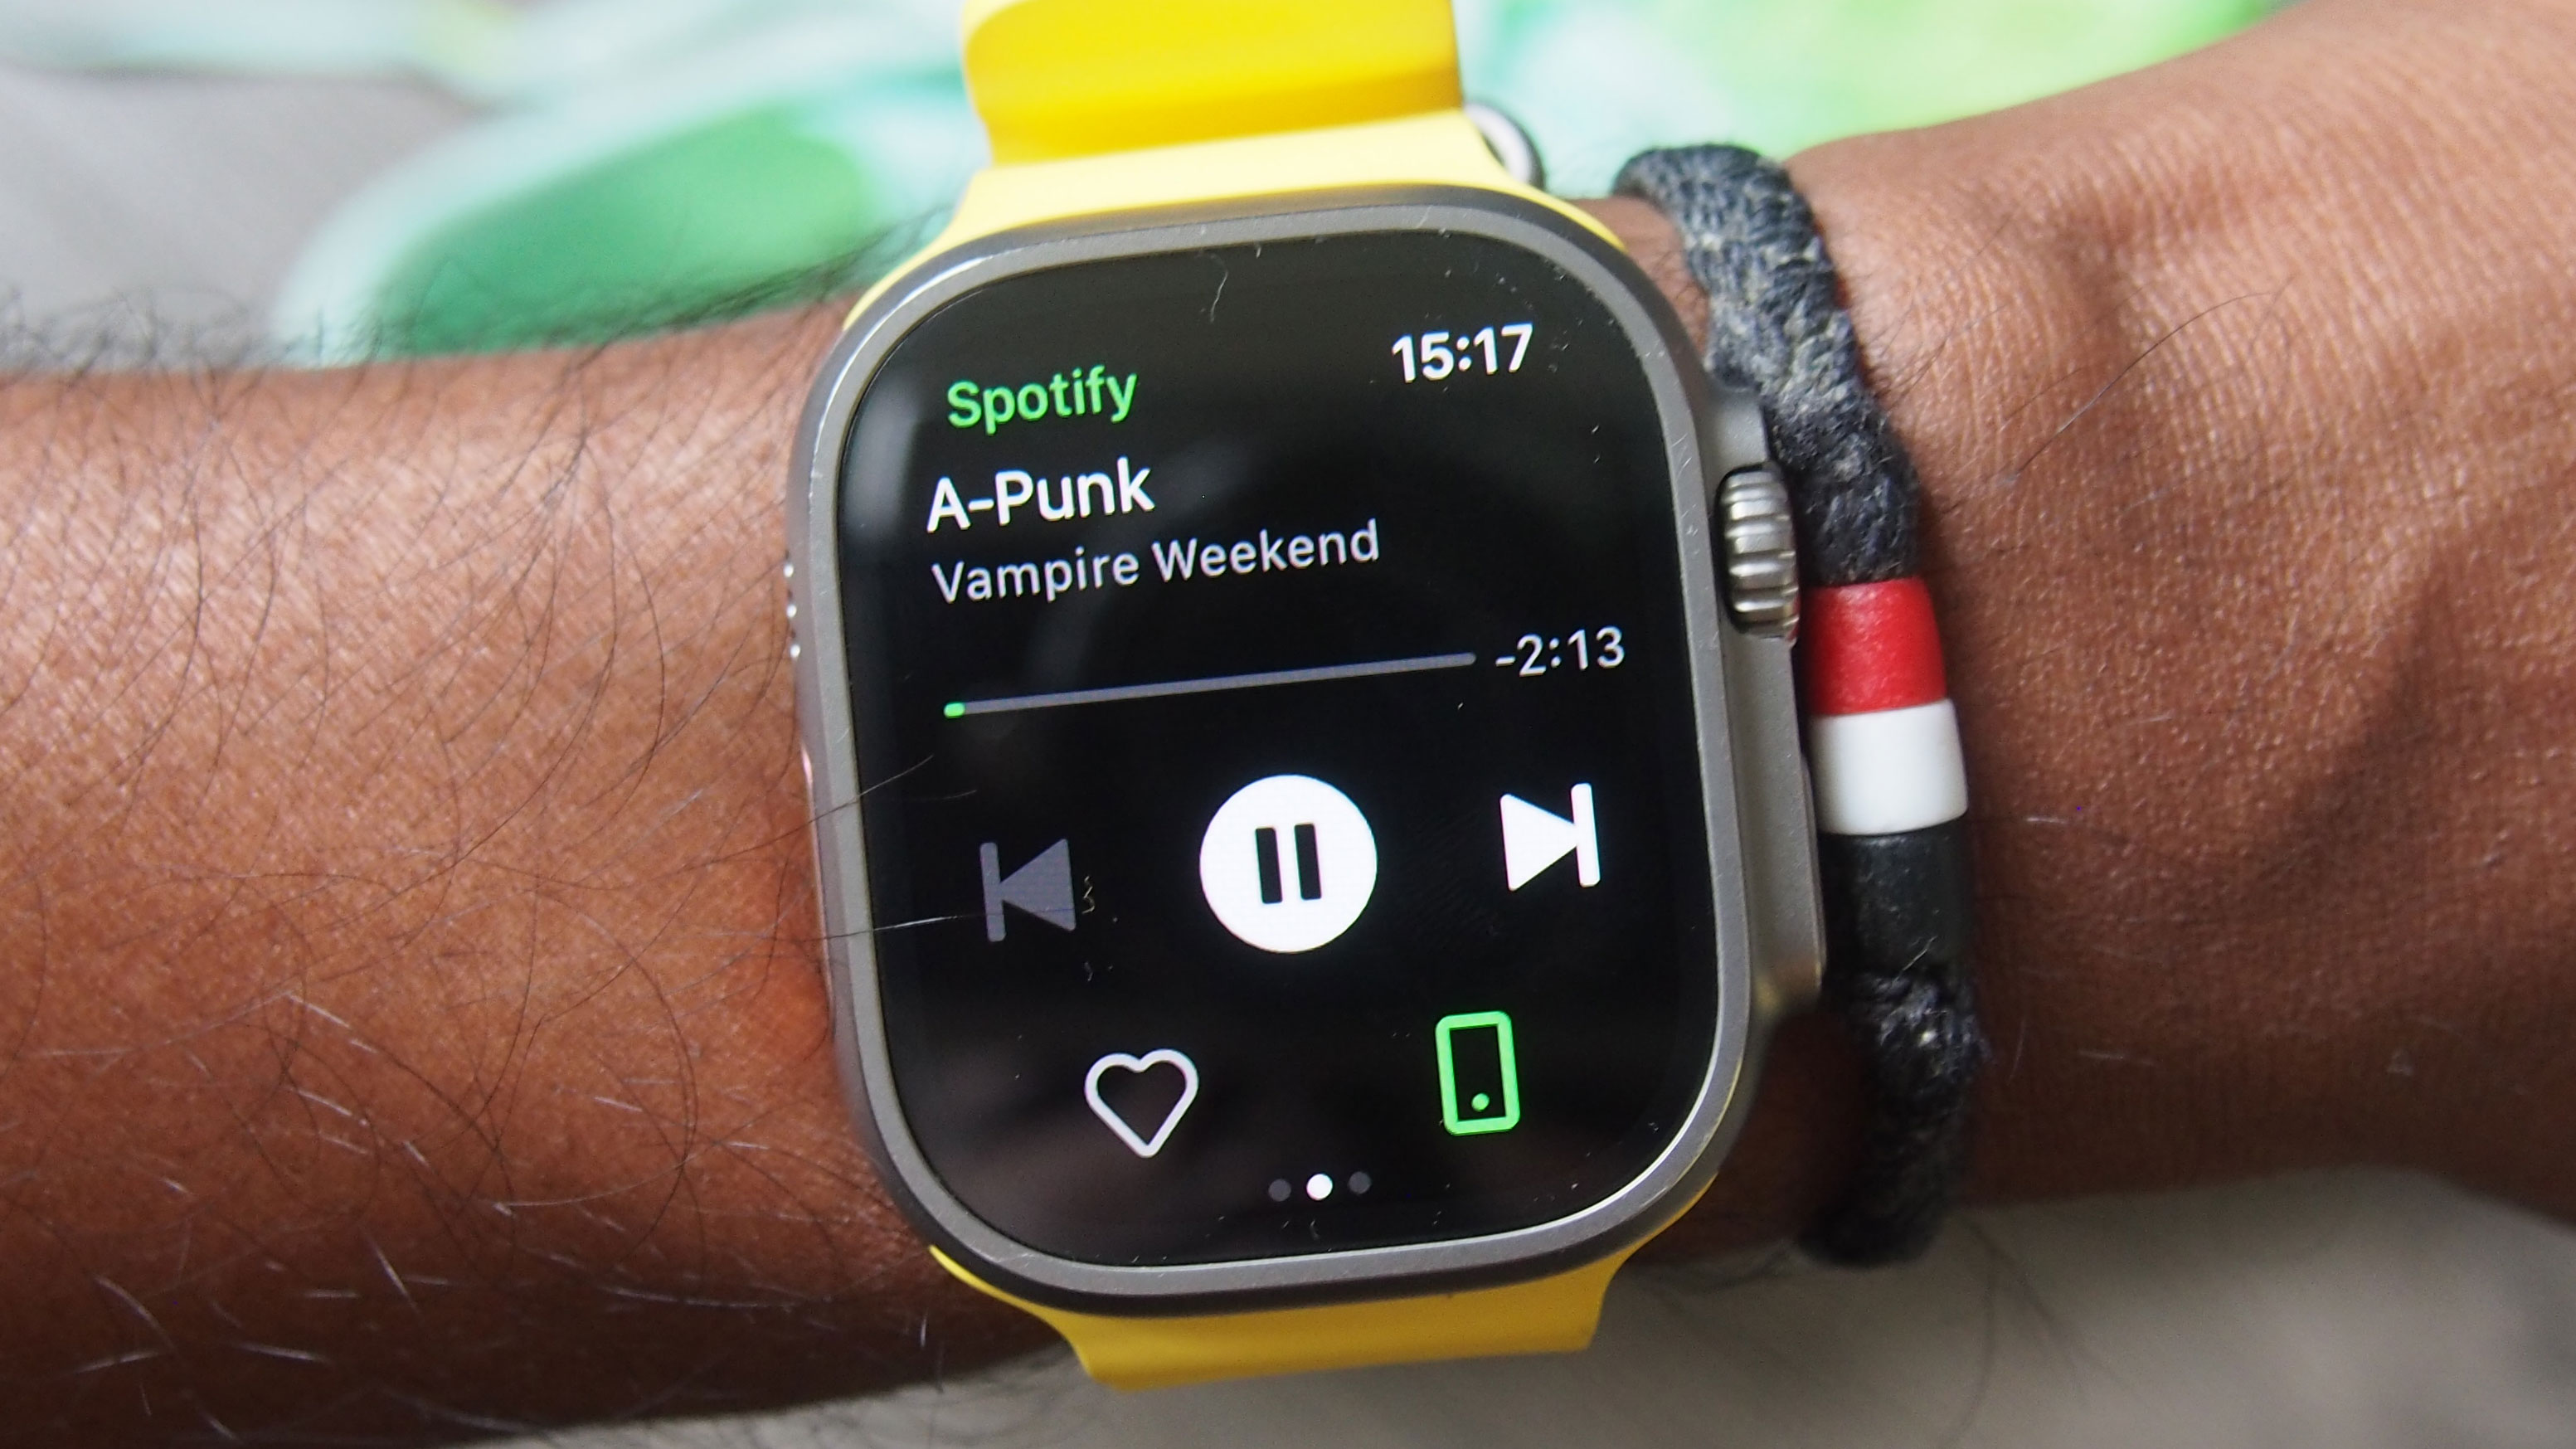 How to store music on an Apple Watch | TechRadar